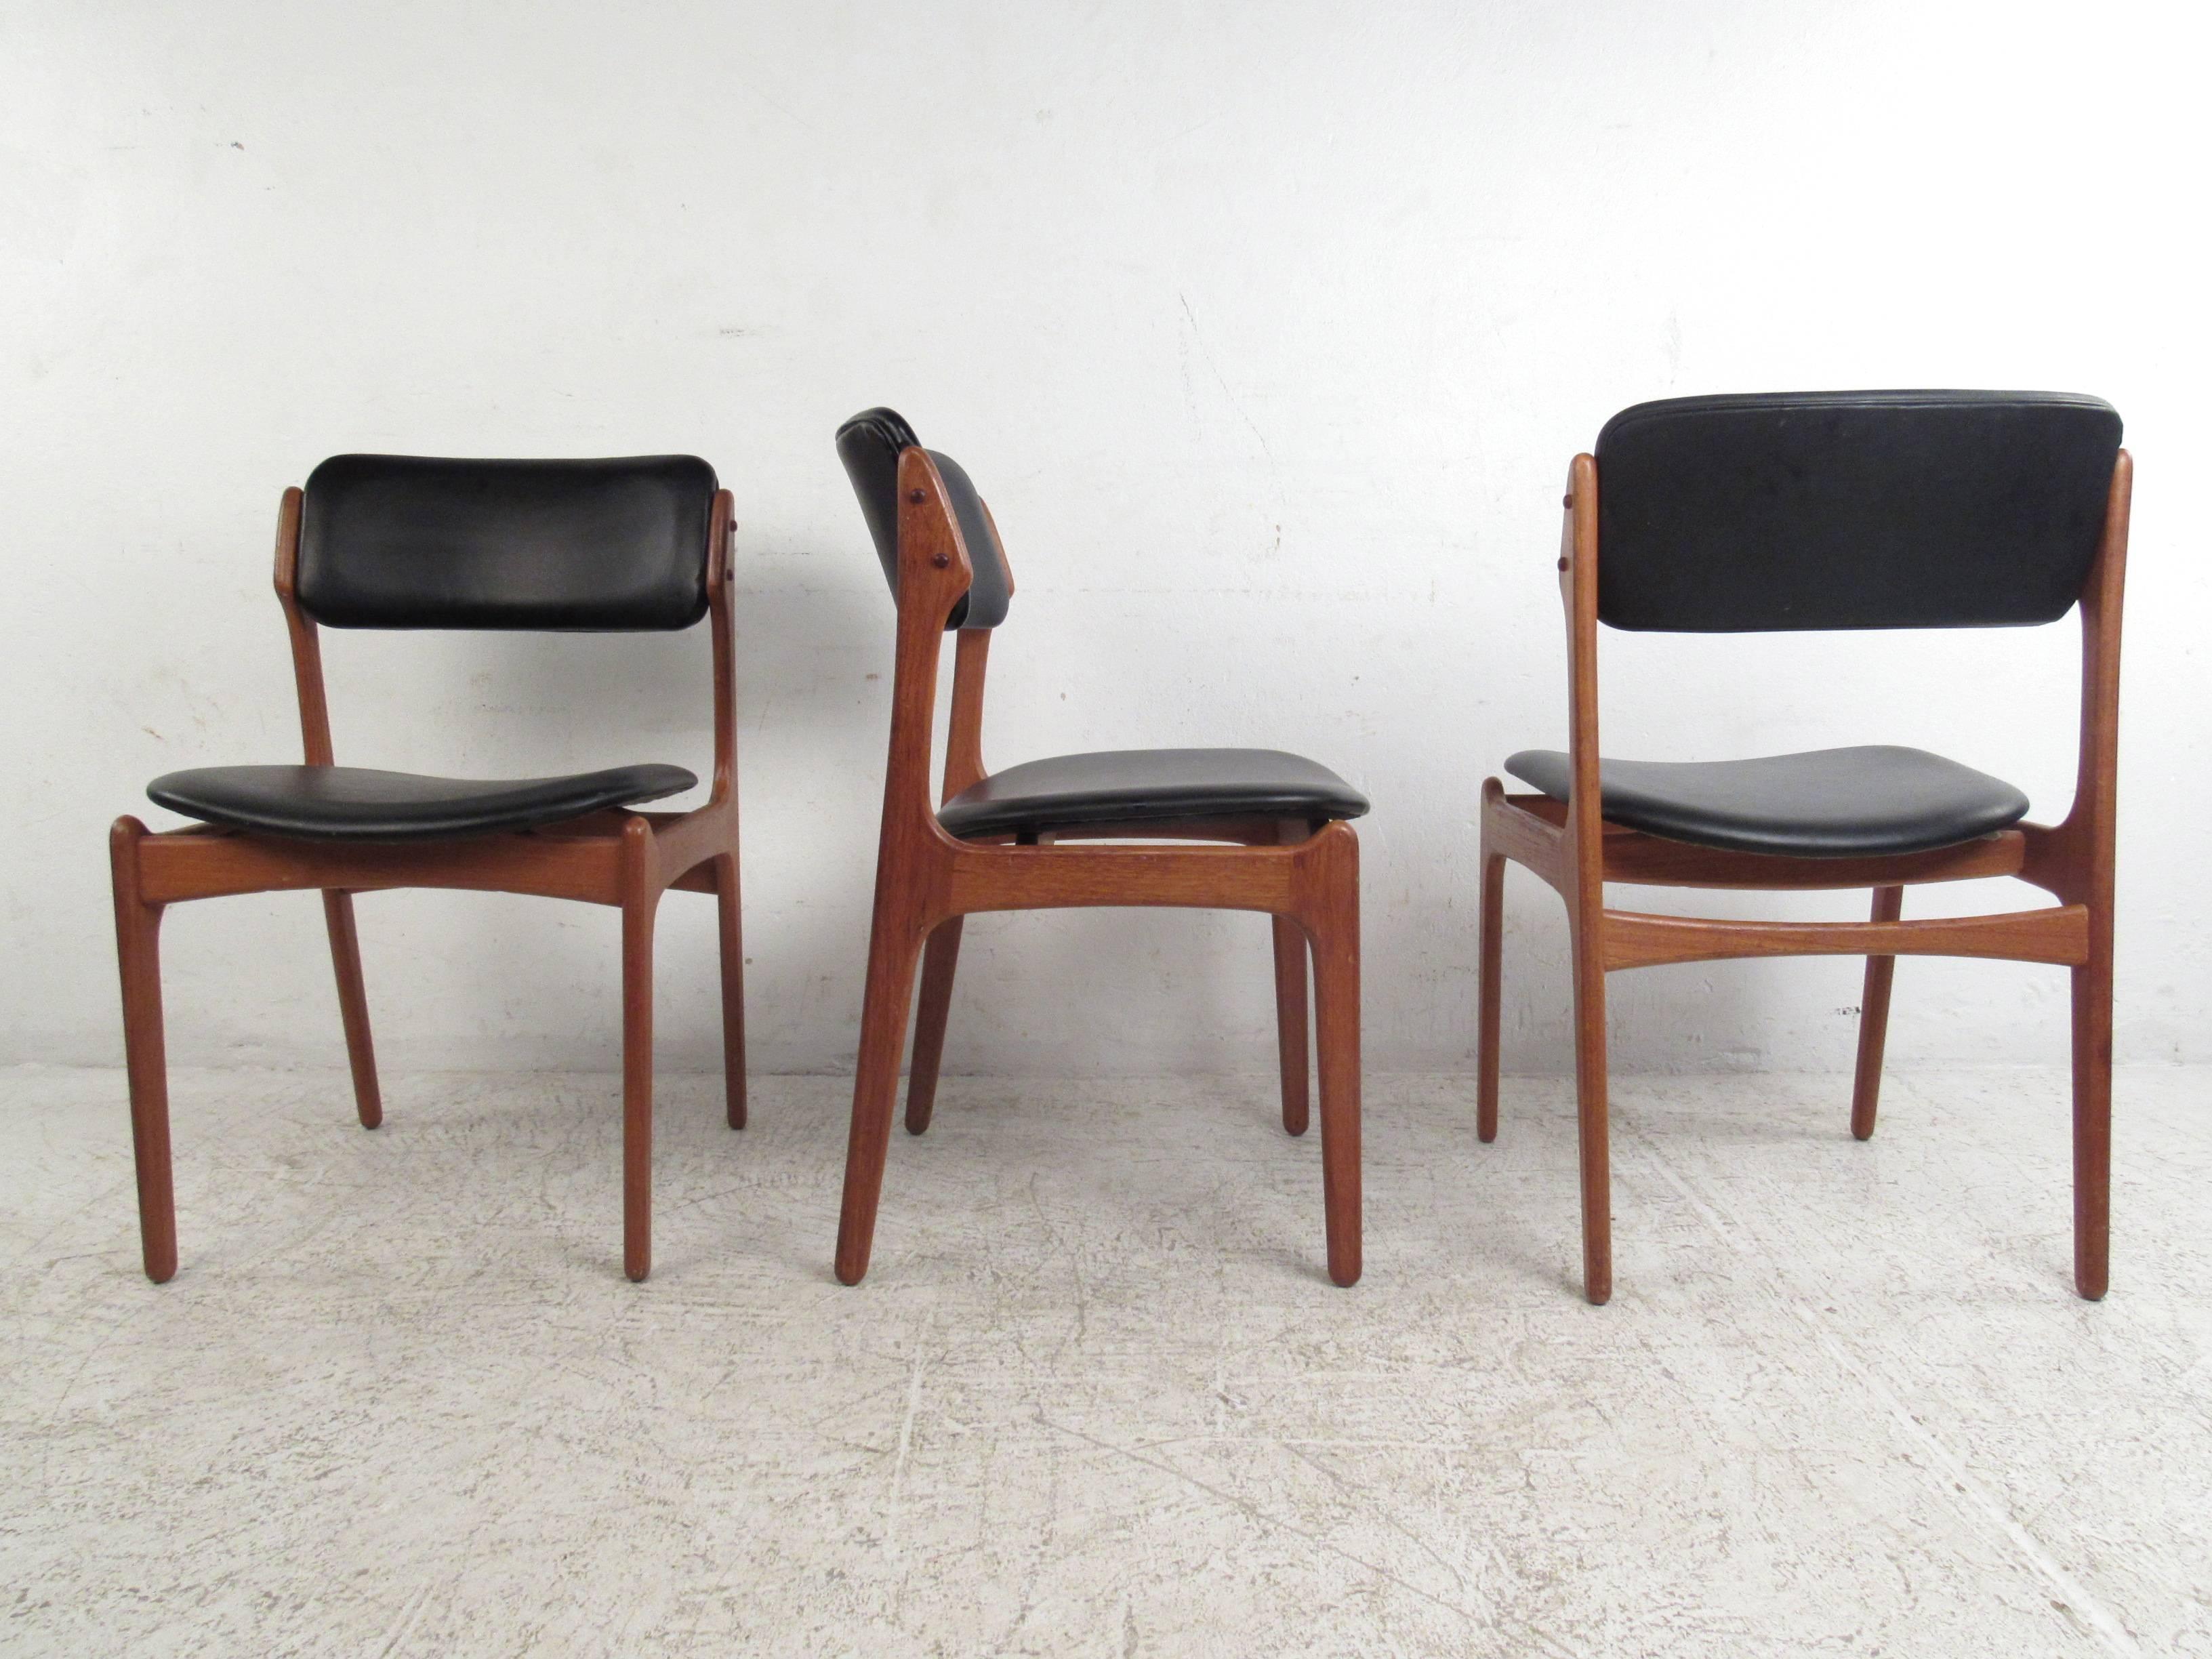 This set of six vintage dining chairs offers Eric Buck's unique combination of simplistic style and irrefutable comfort. Lovely tapered teak frames complete with durable vinyl upholstery make this unique set the perfect compliment to any modern